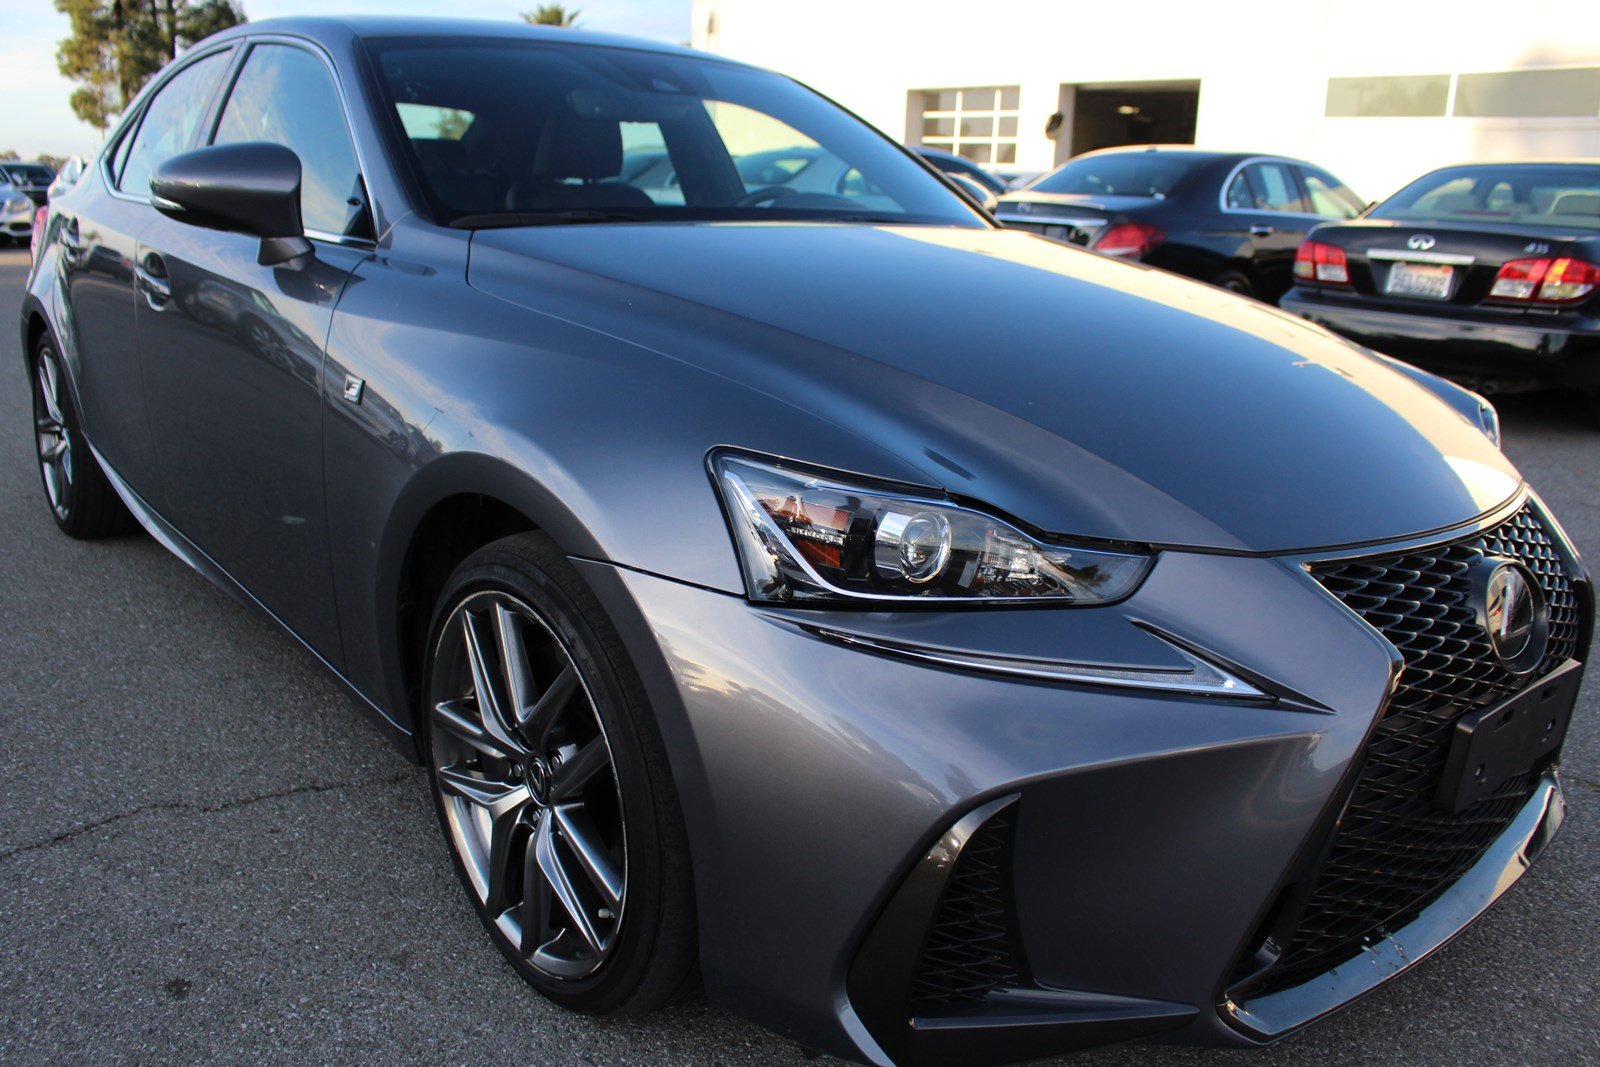 PreOwned 2017 Lexus IS 200t F Sport Package